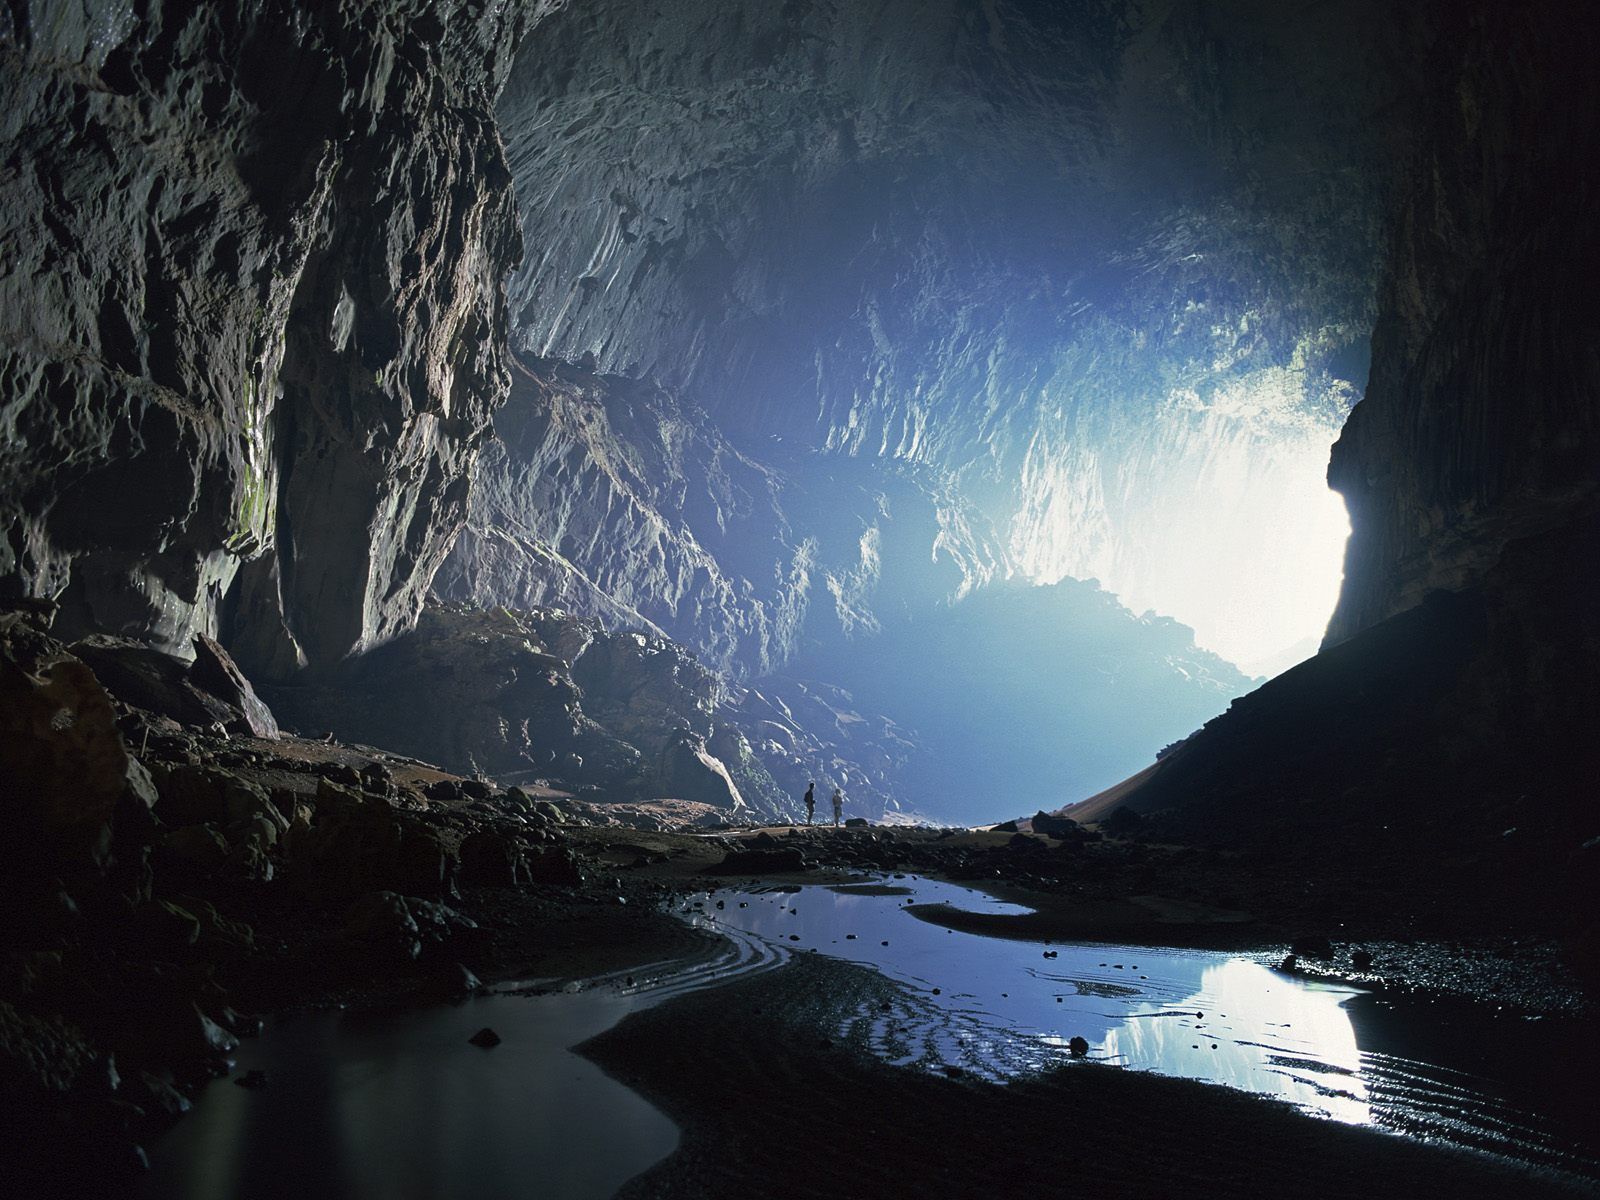 Best Caving Places In Malaysia